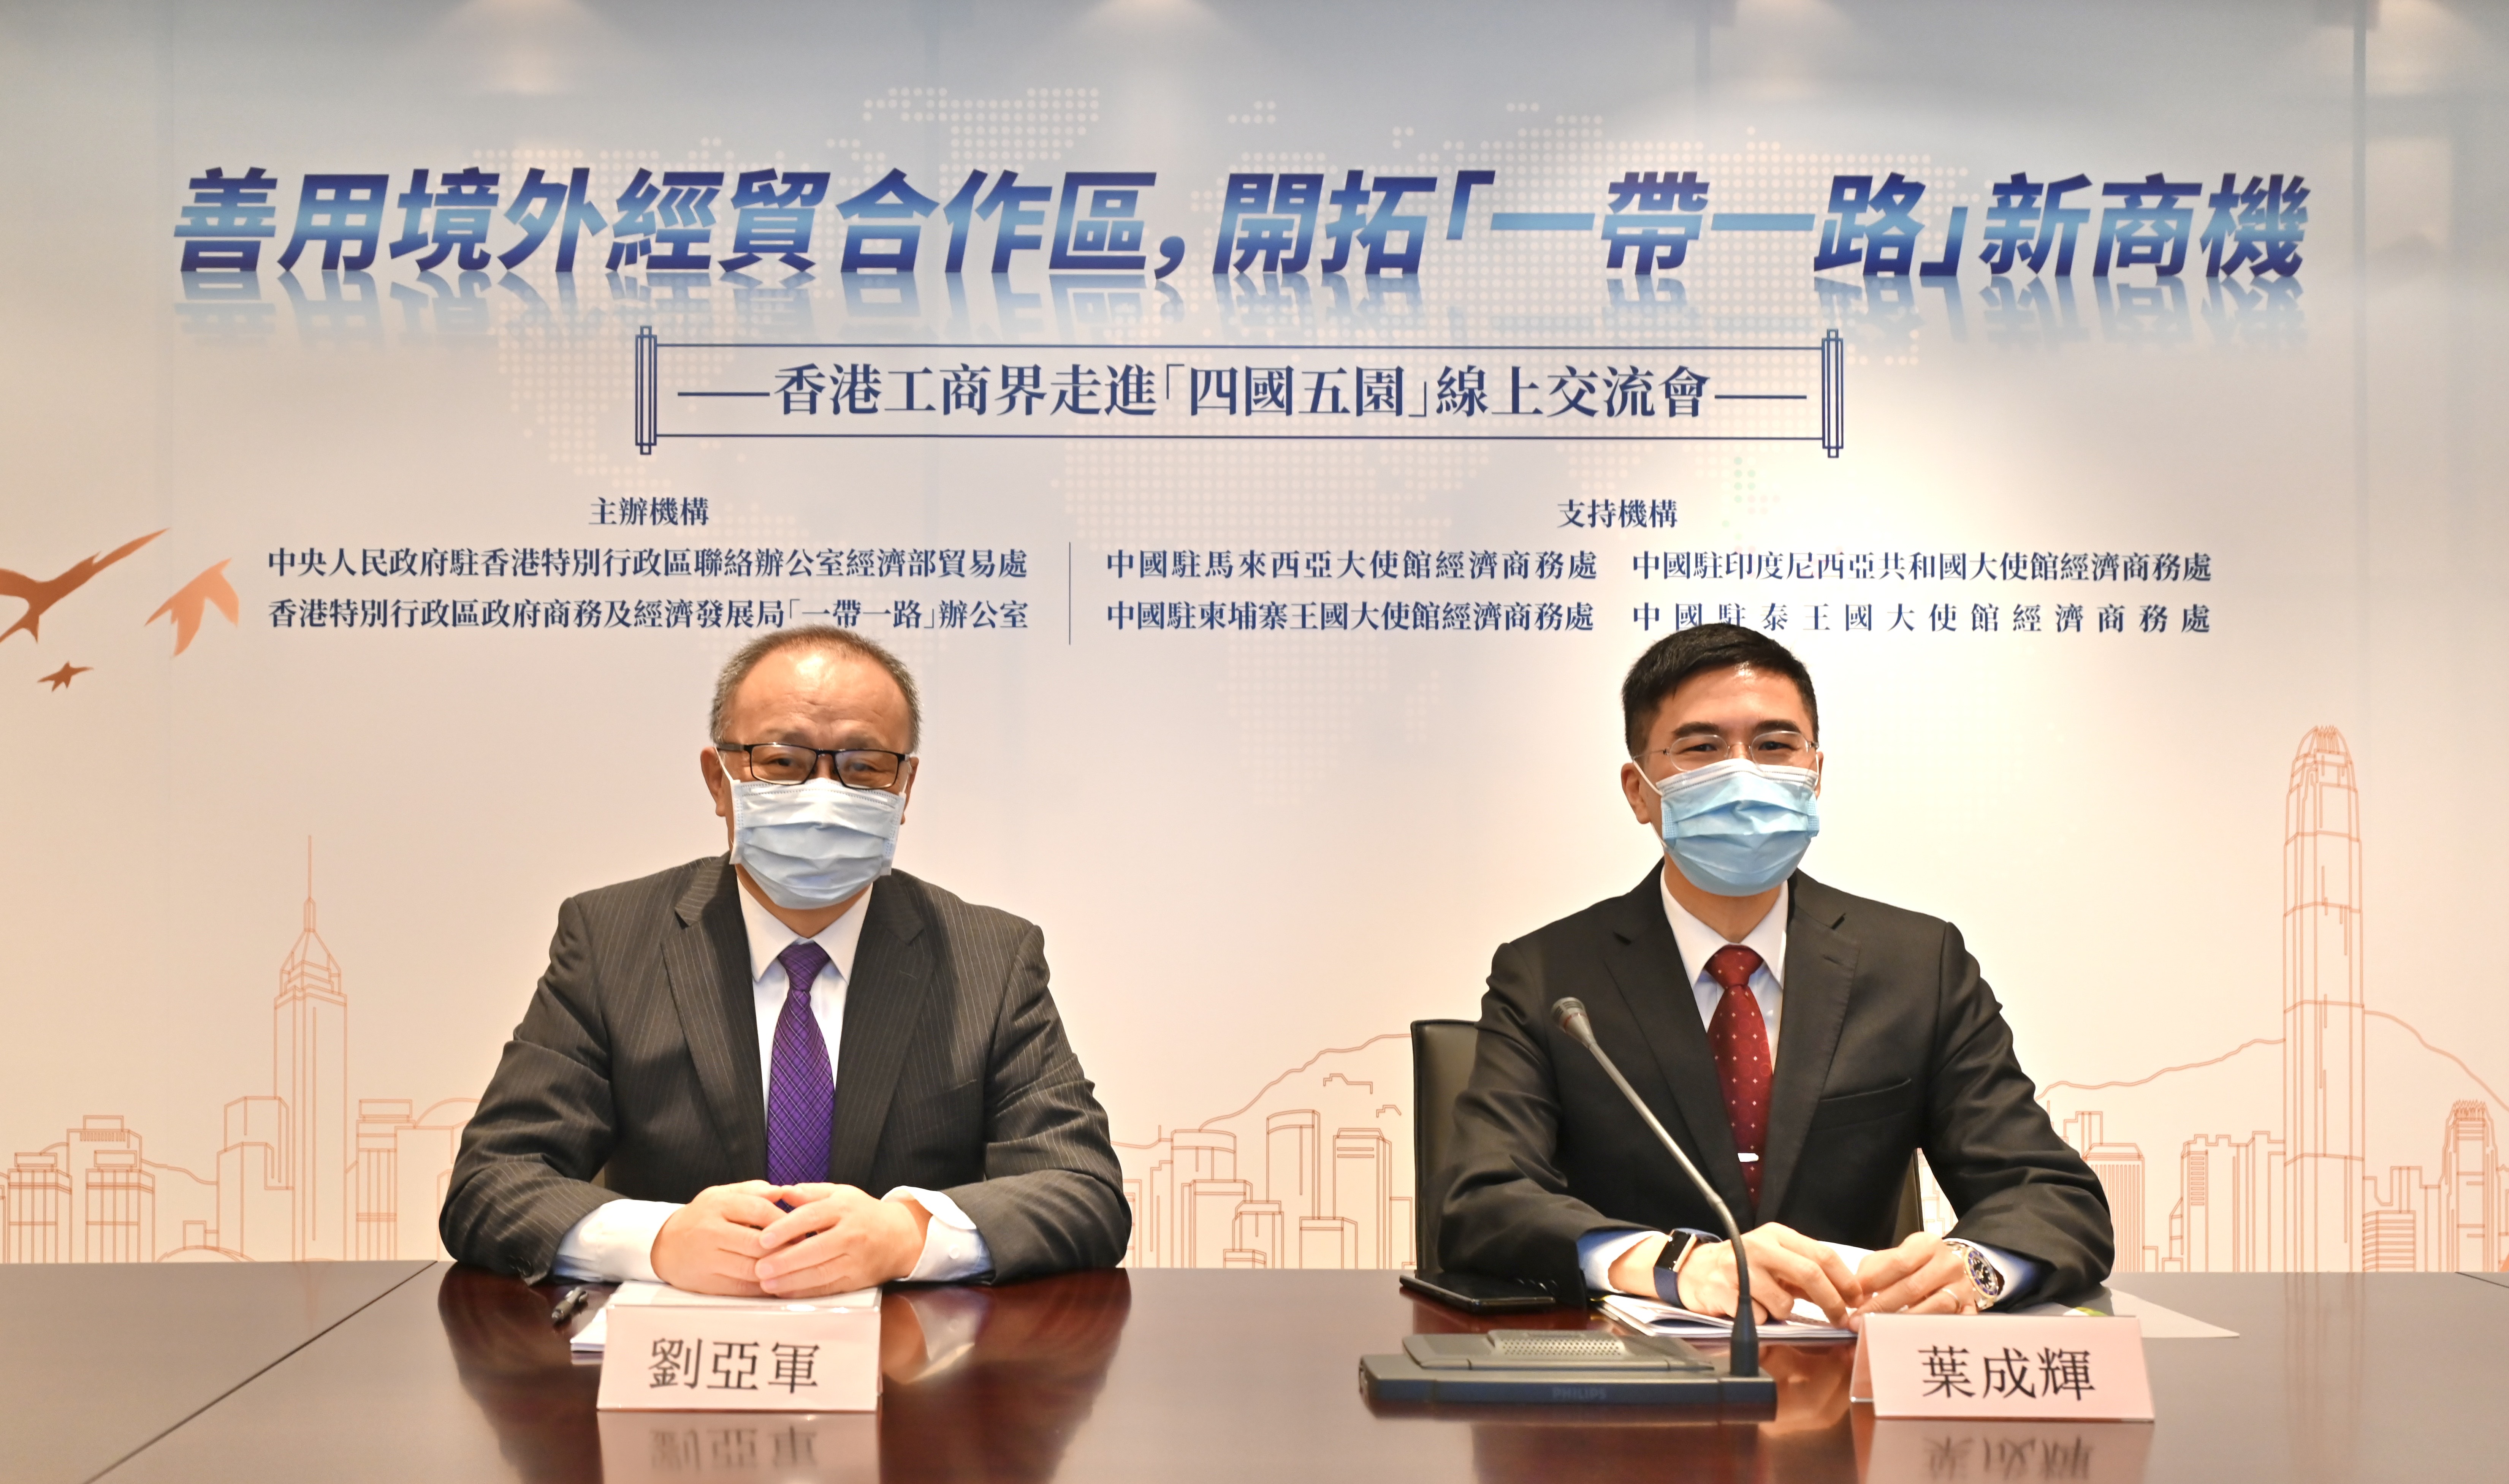 The Belt and Road Office of the Commerce and Economic Development Bureau (CEDB) and the Commercial Office of the Economic Affairs Department of the Liaison Office of the Central People's Government (LOCPG) in the Hong Kong Special Administrative Region (HKSAR) jointly held two webinars on 15 June 2021 and 22 June 2021 to enhance Hong Kong enterprises' understanding of the overseas Economic and Trade Co-operation Zones. The Commissioner for Belt and Road from the CEDB, Dr Denis Yip (right), and the Deputy Director-General of the Economic Affairs Department and Head of the Commercial Office of the LOCPG in the HKSAR, Mr Liu Yajun (left), attended the event.